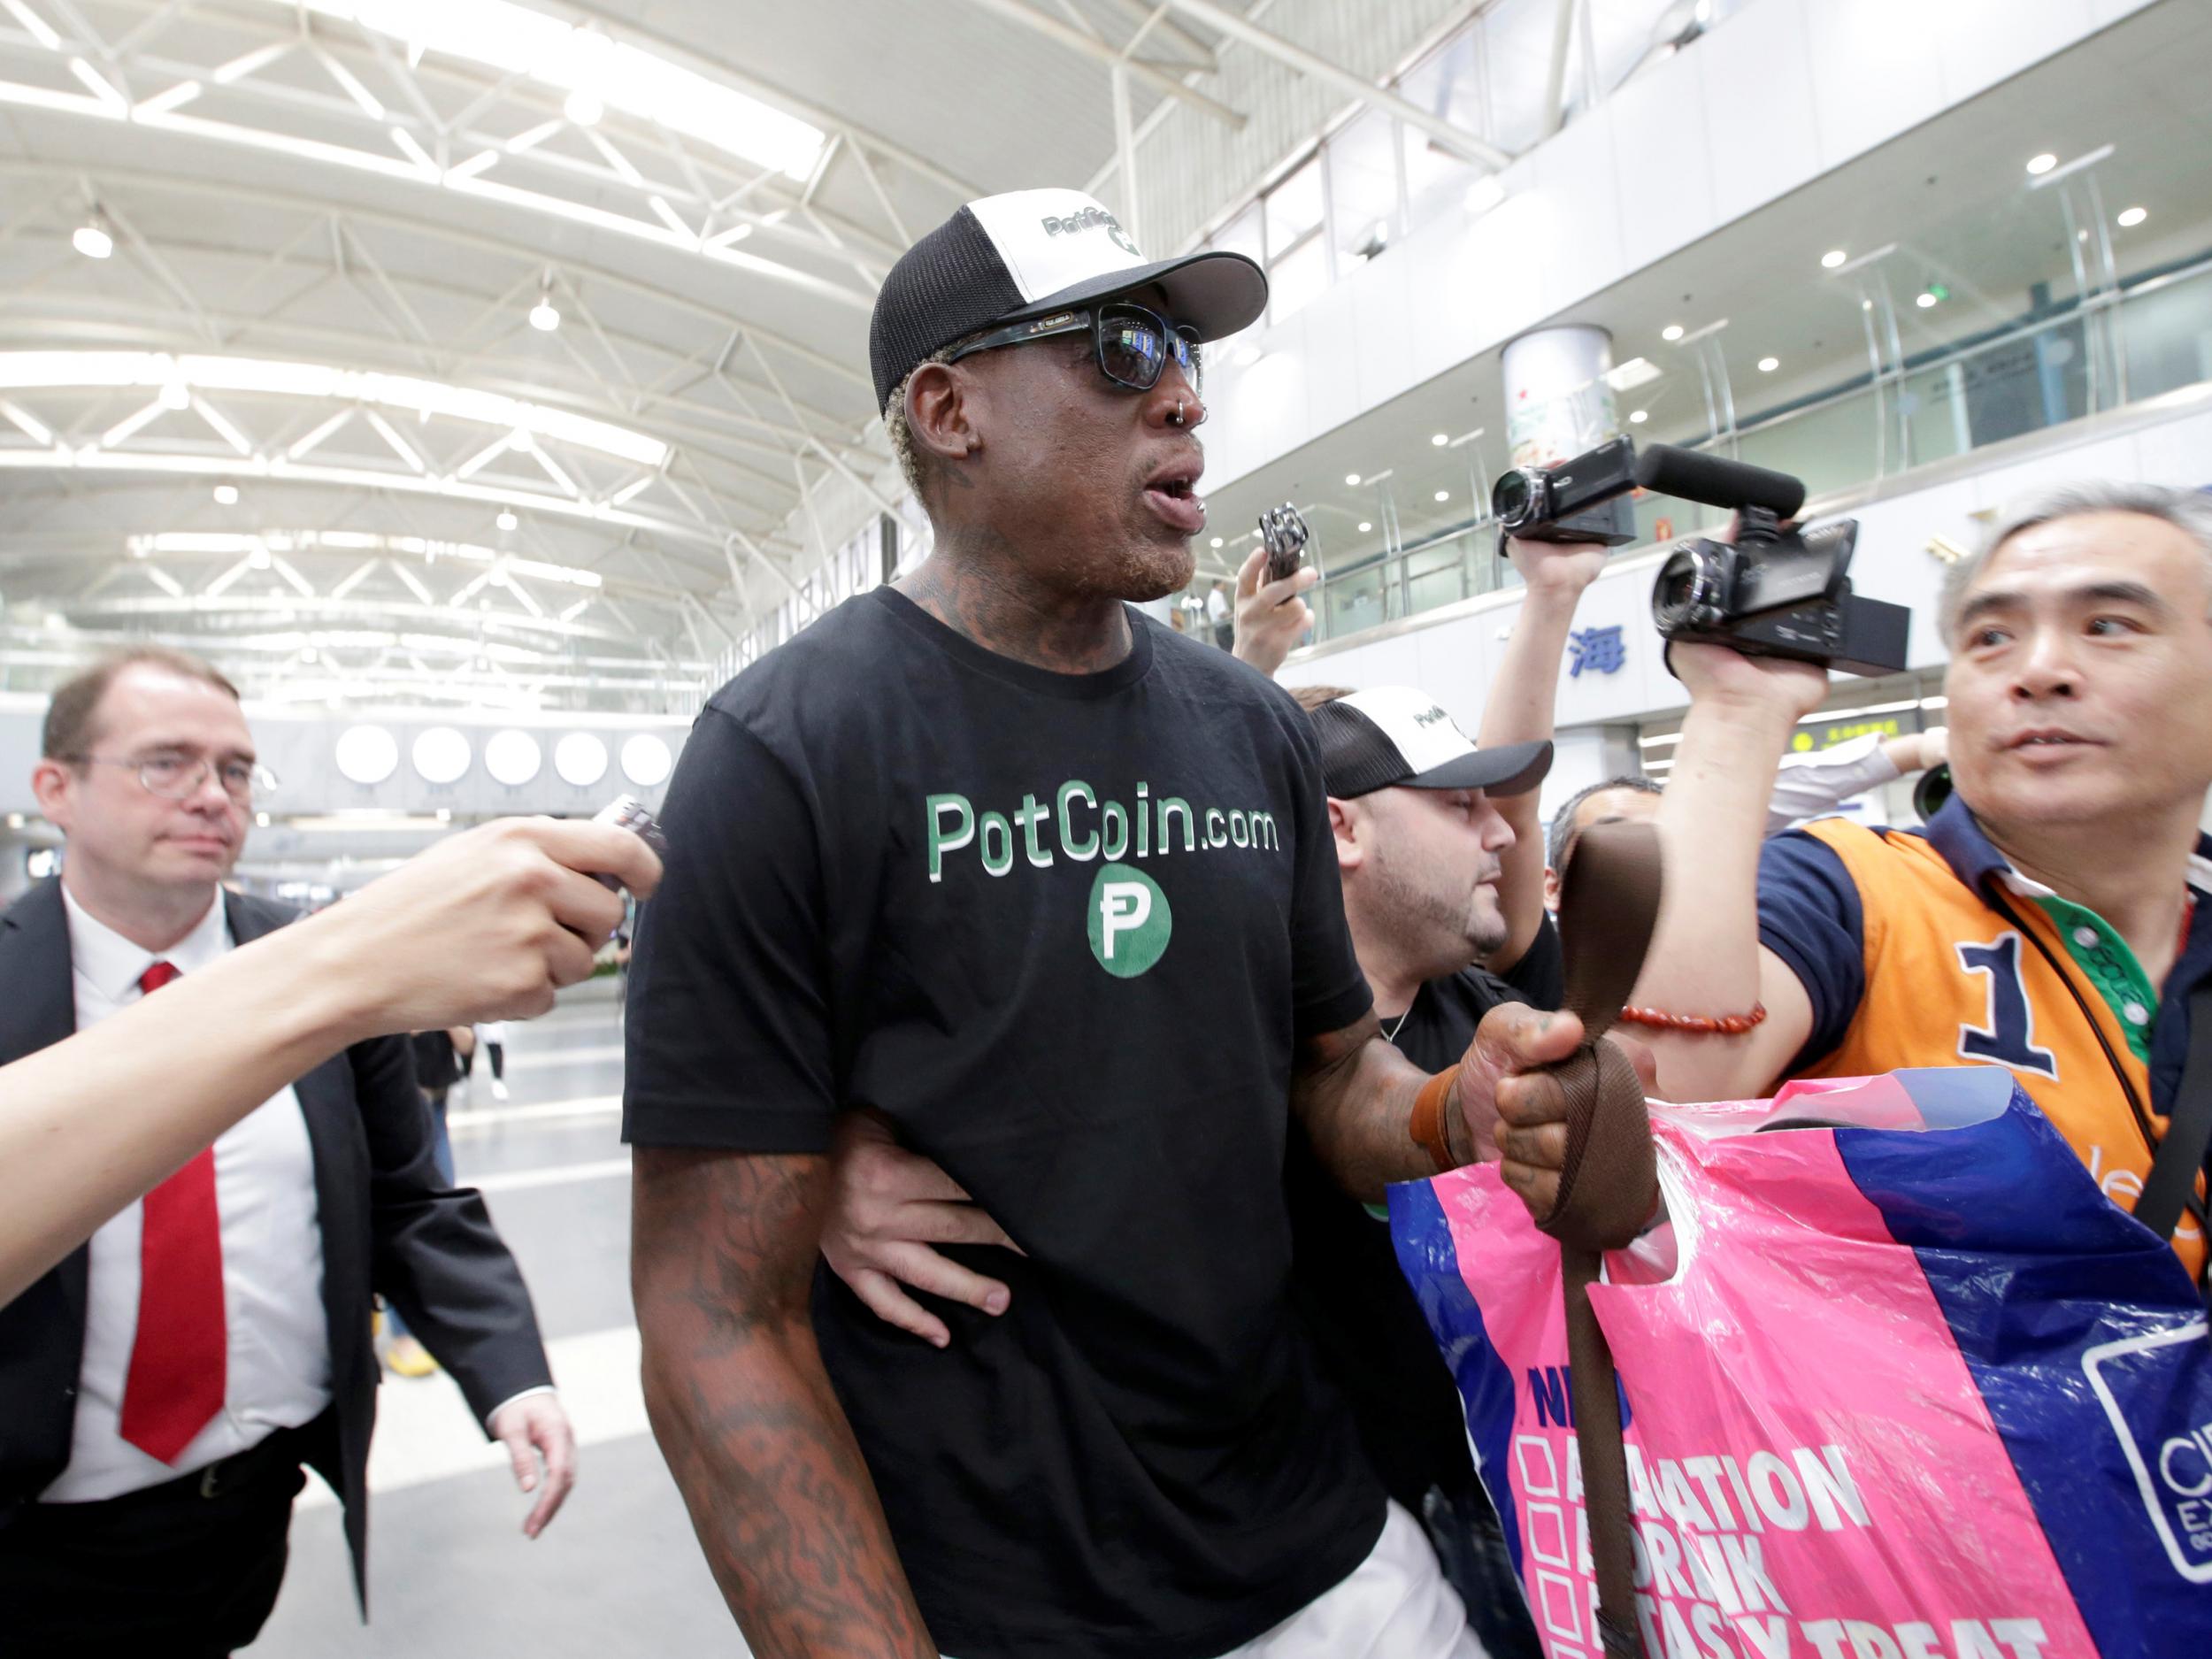 Dennis Rodman has been traveling around Asia as a would-be freelance diplomat